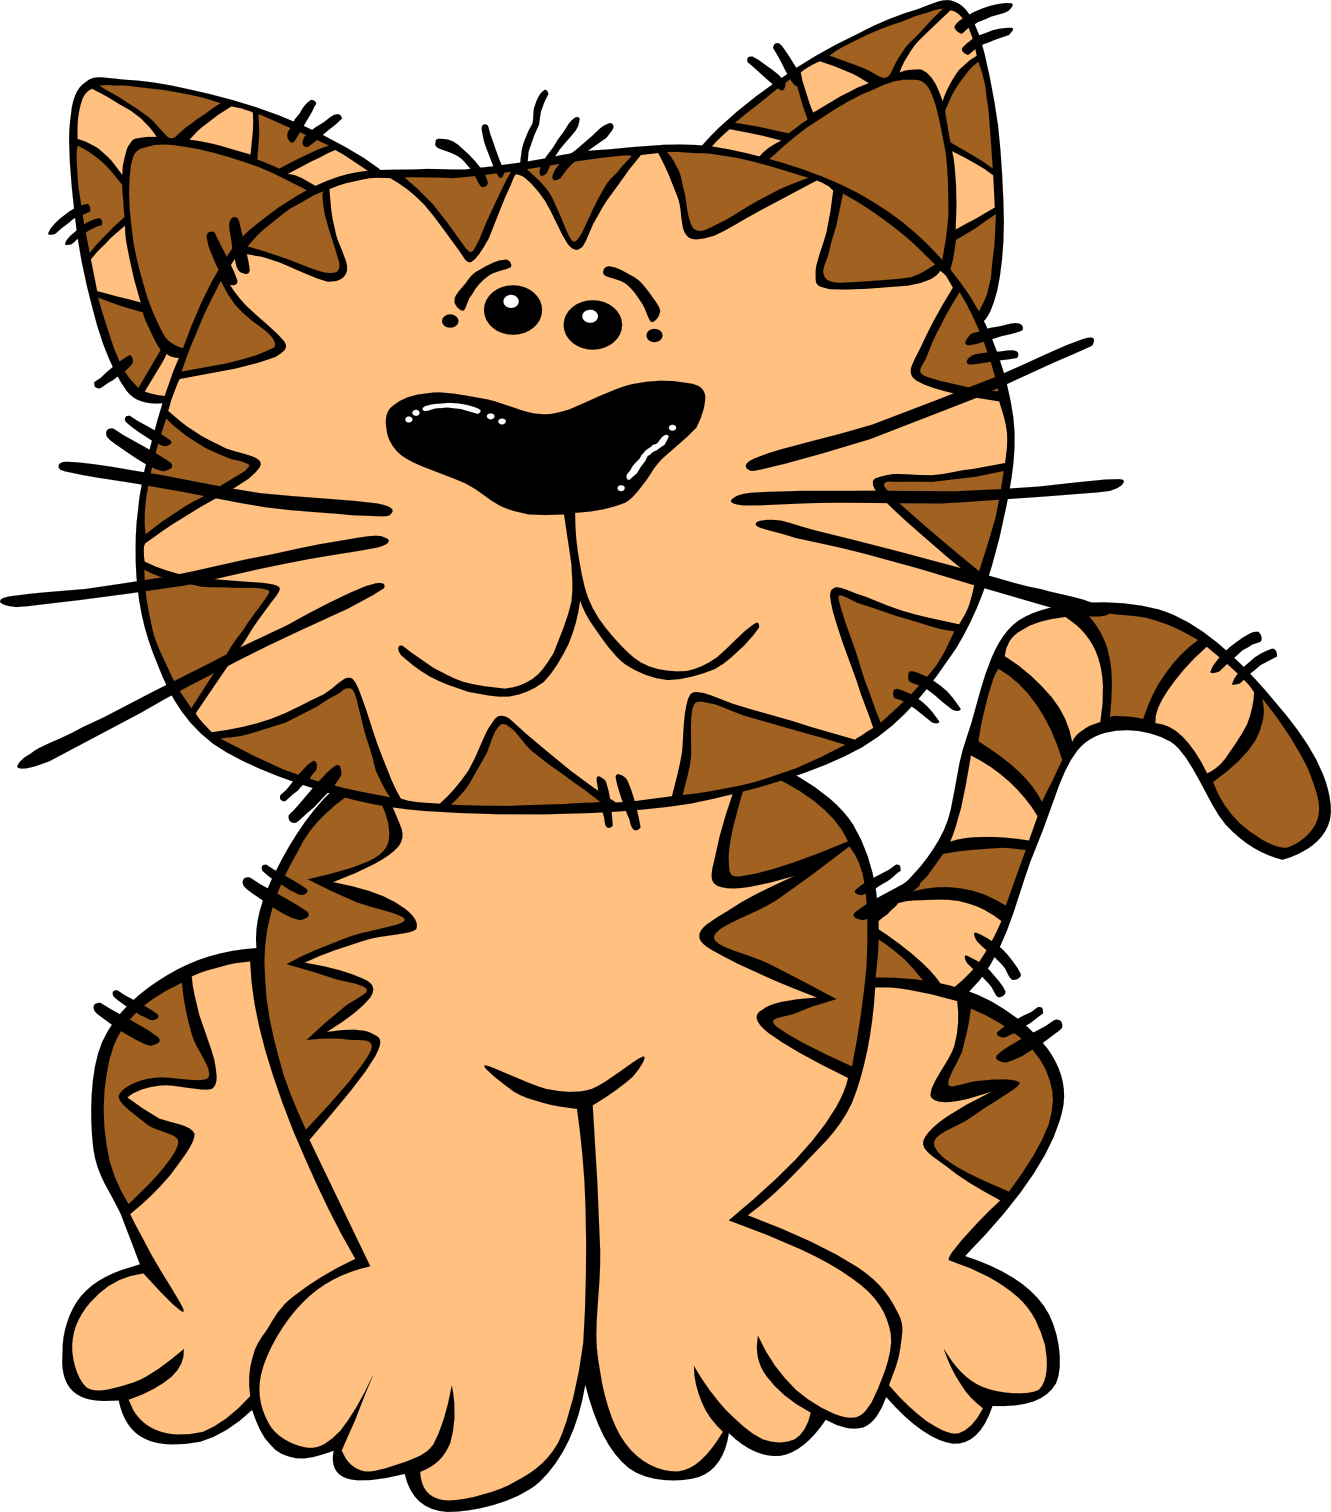 Free cartoon picture of. Kitten clipart striped cat